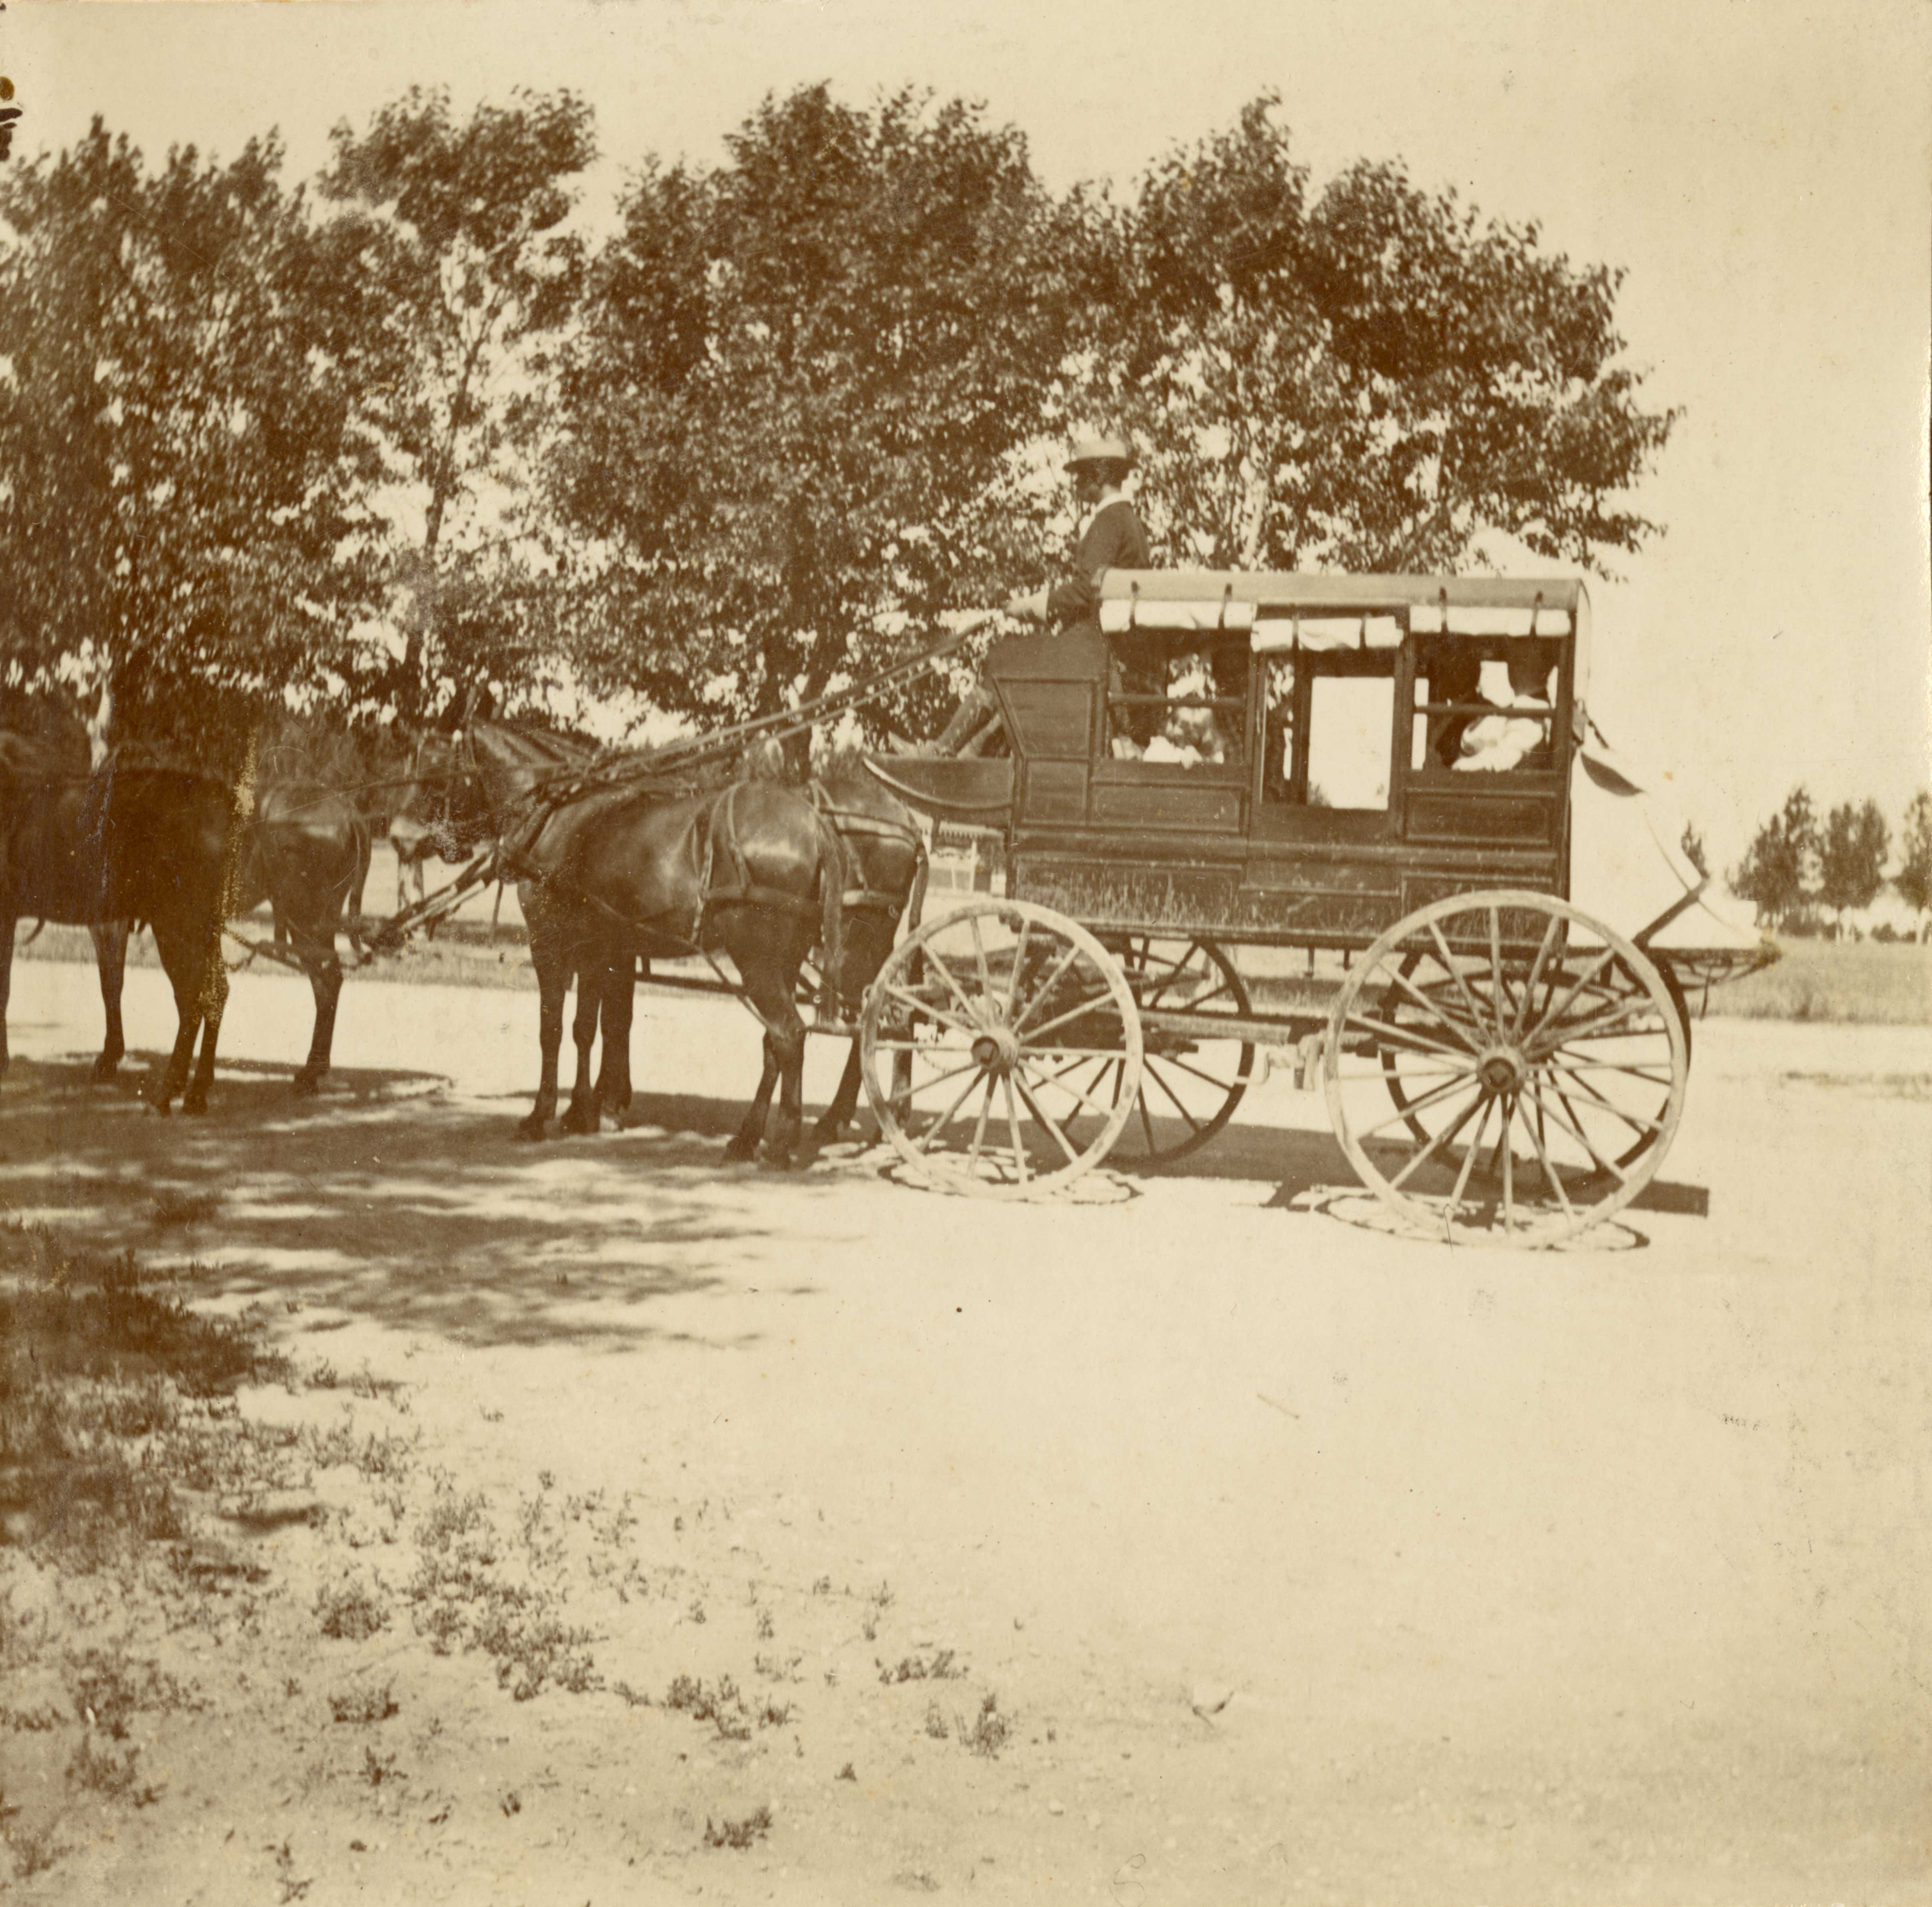 [Stagecoach with passengers, probably at Fort Robinson, Nebraska]